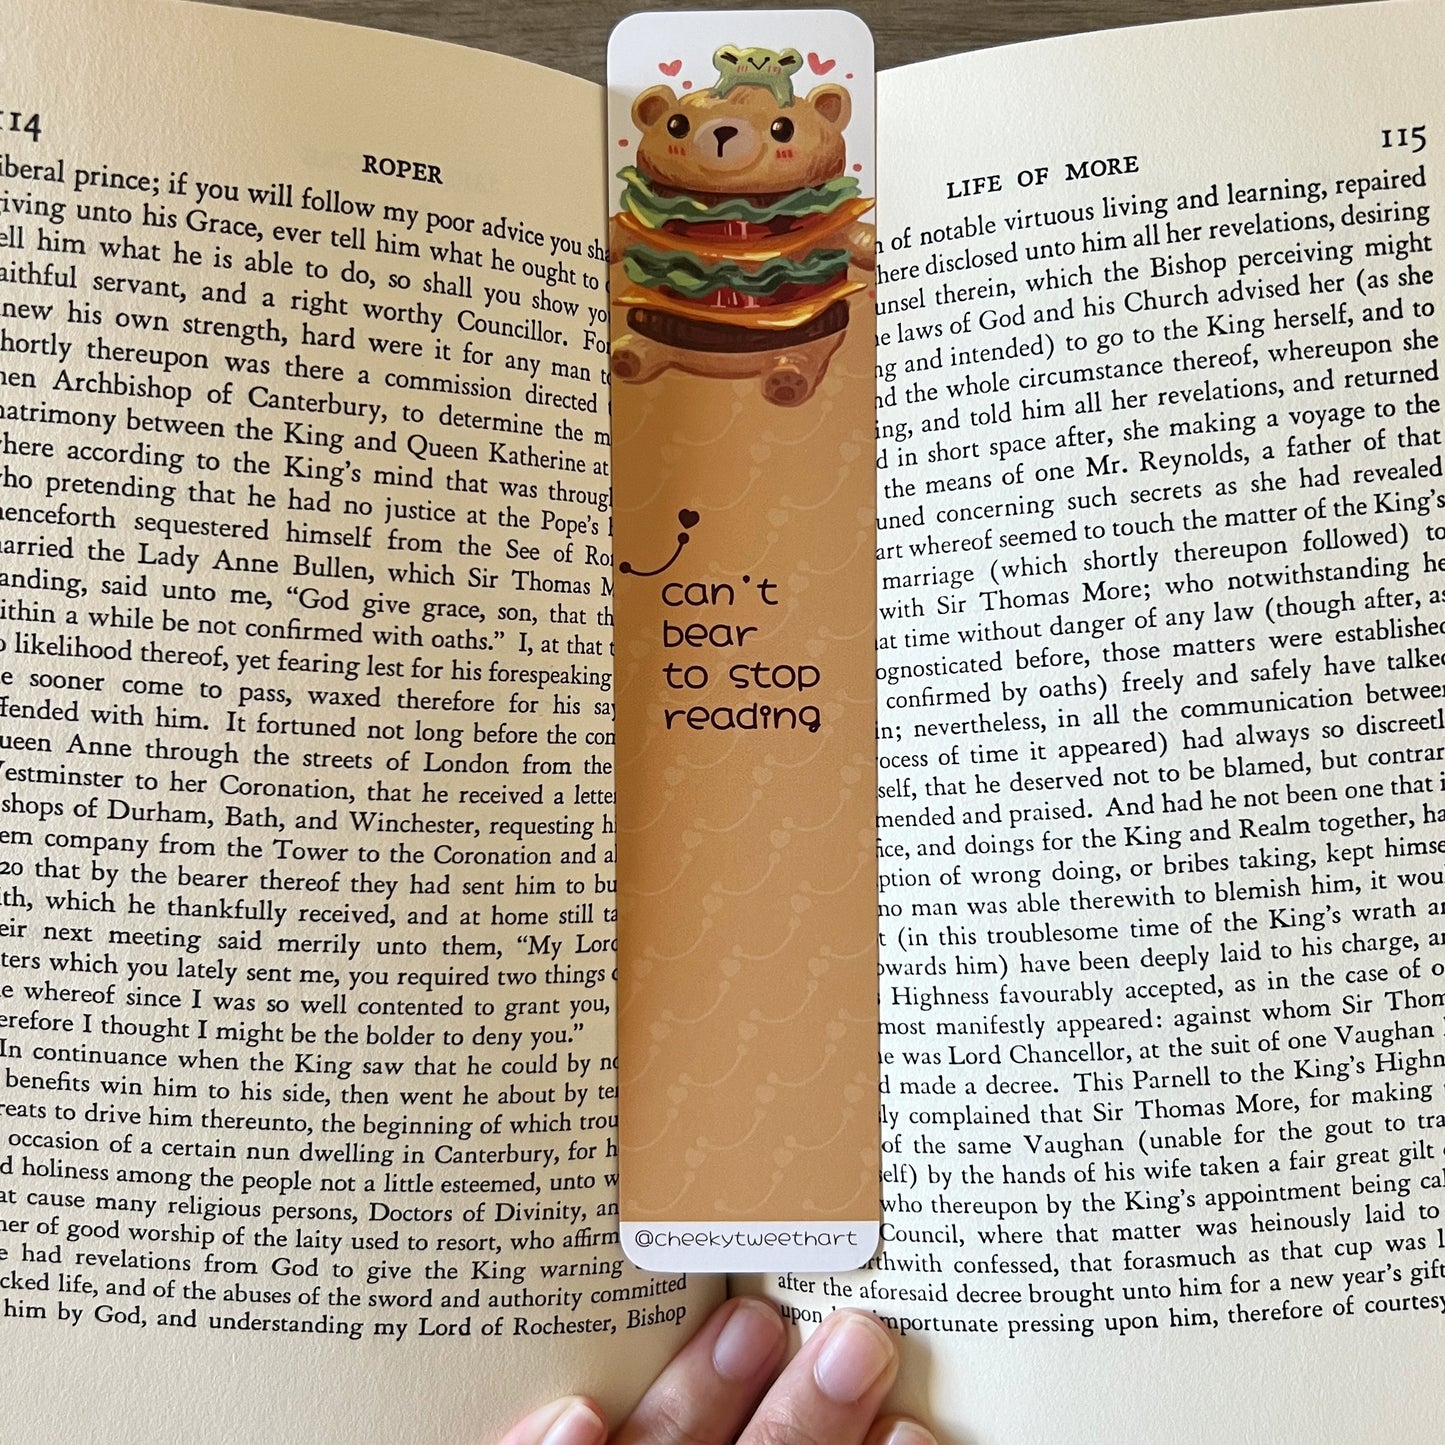 Can’t Bear to Stop Reading Ribbert Frog Bookmark #B001